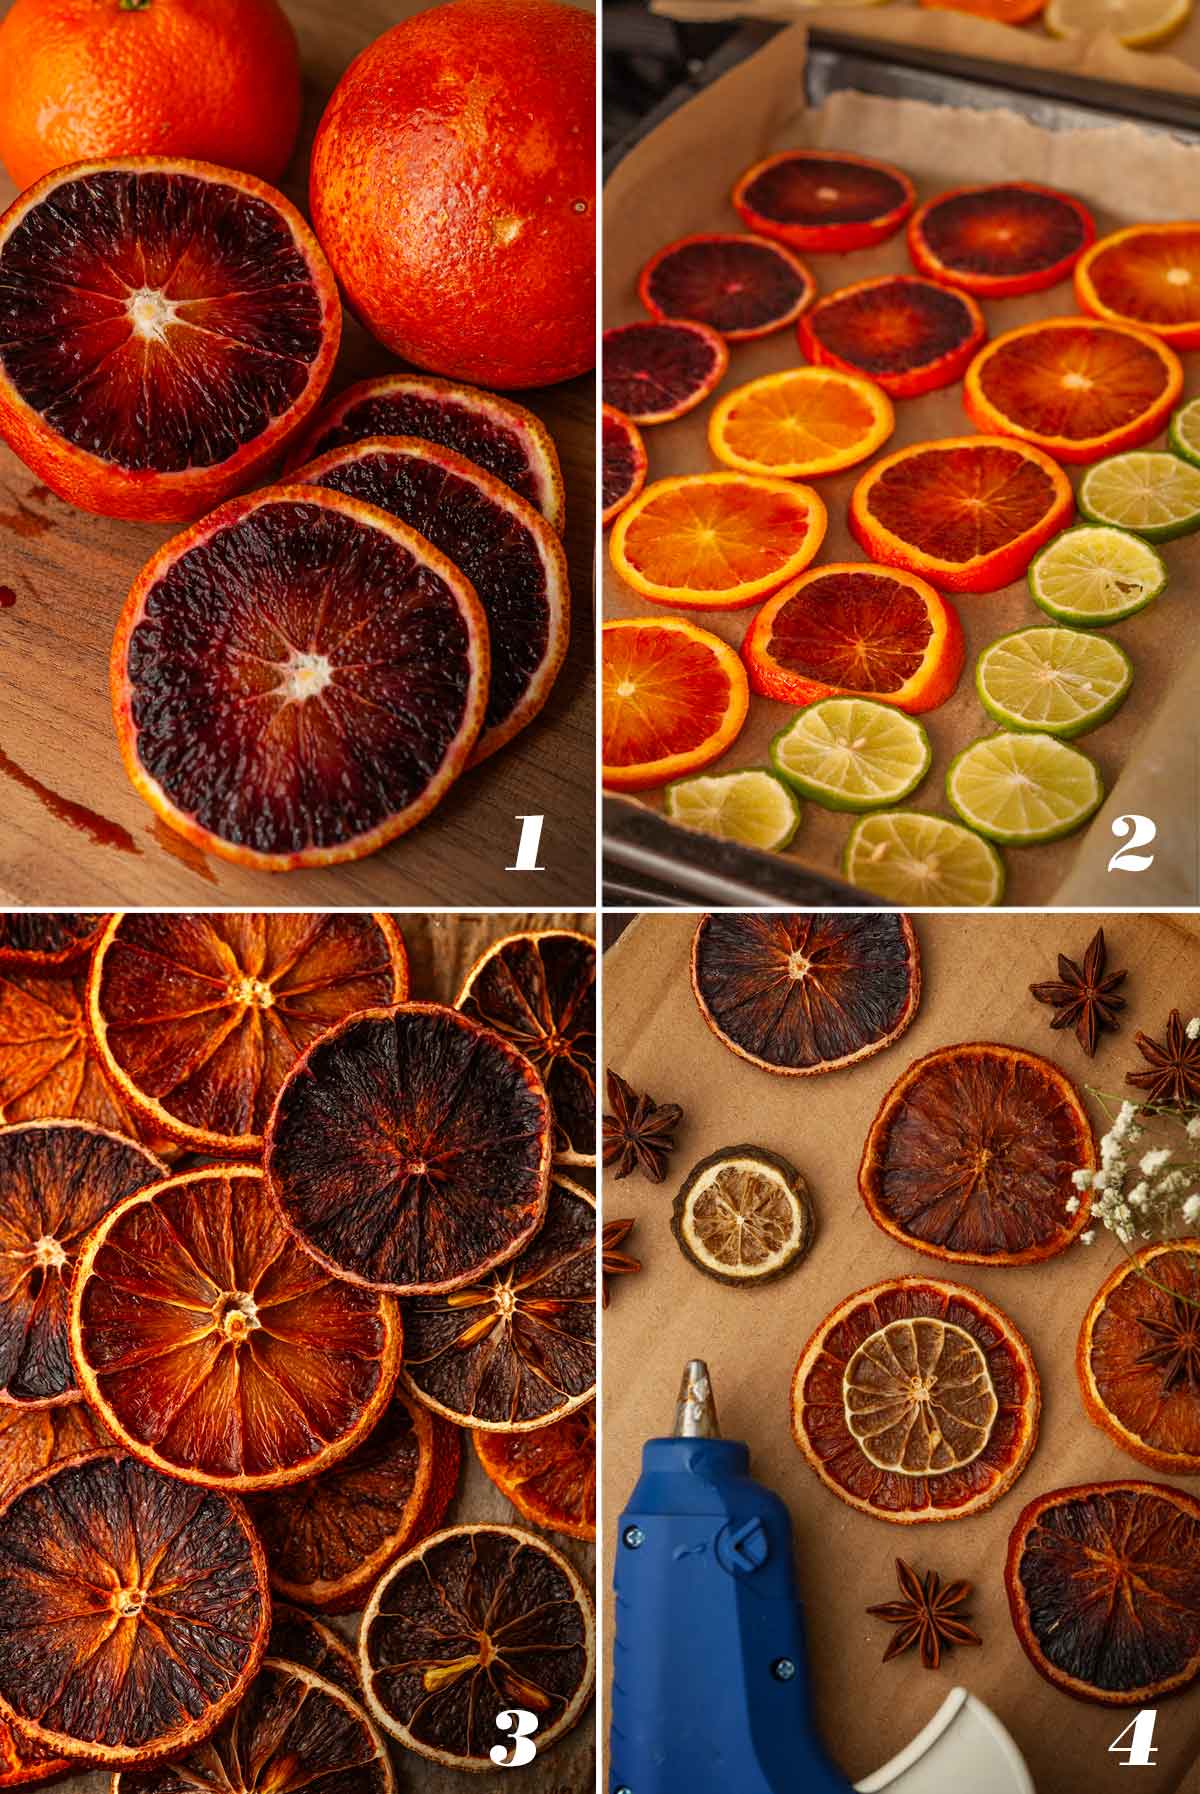 A coallge of 4 numbered images showing how to make citrus ornaments.